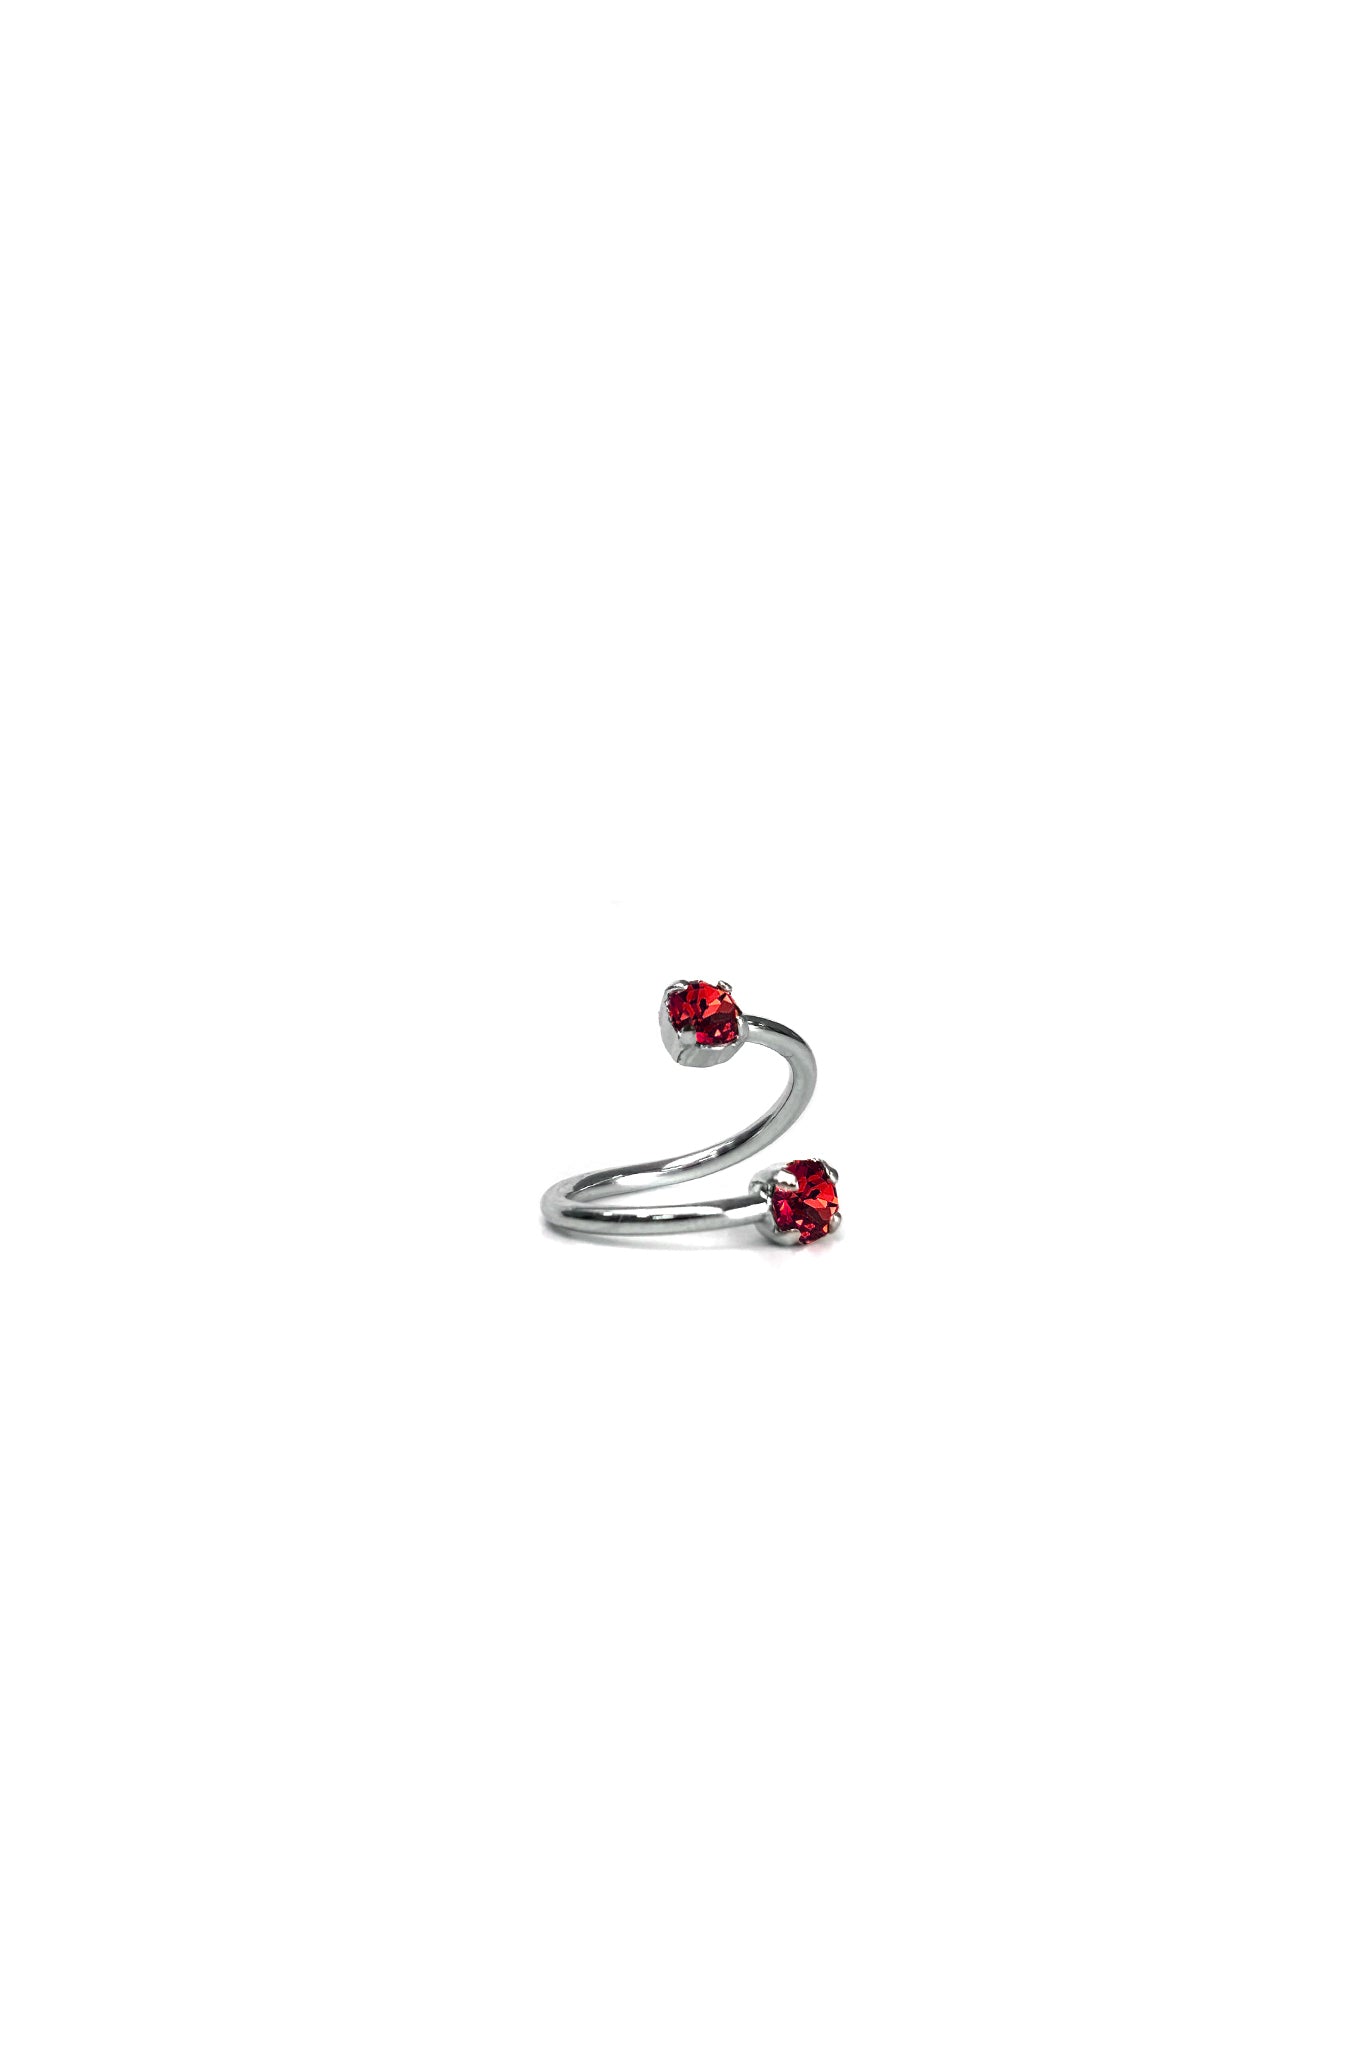 Justine Clenquet Juno Mid Ring, Red